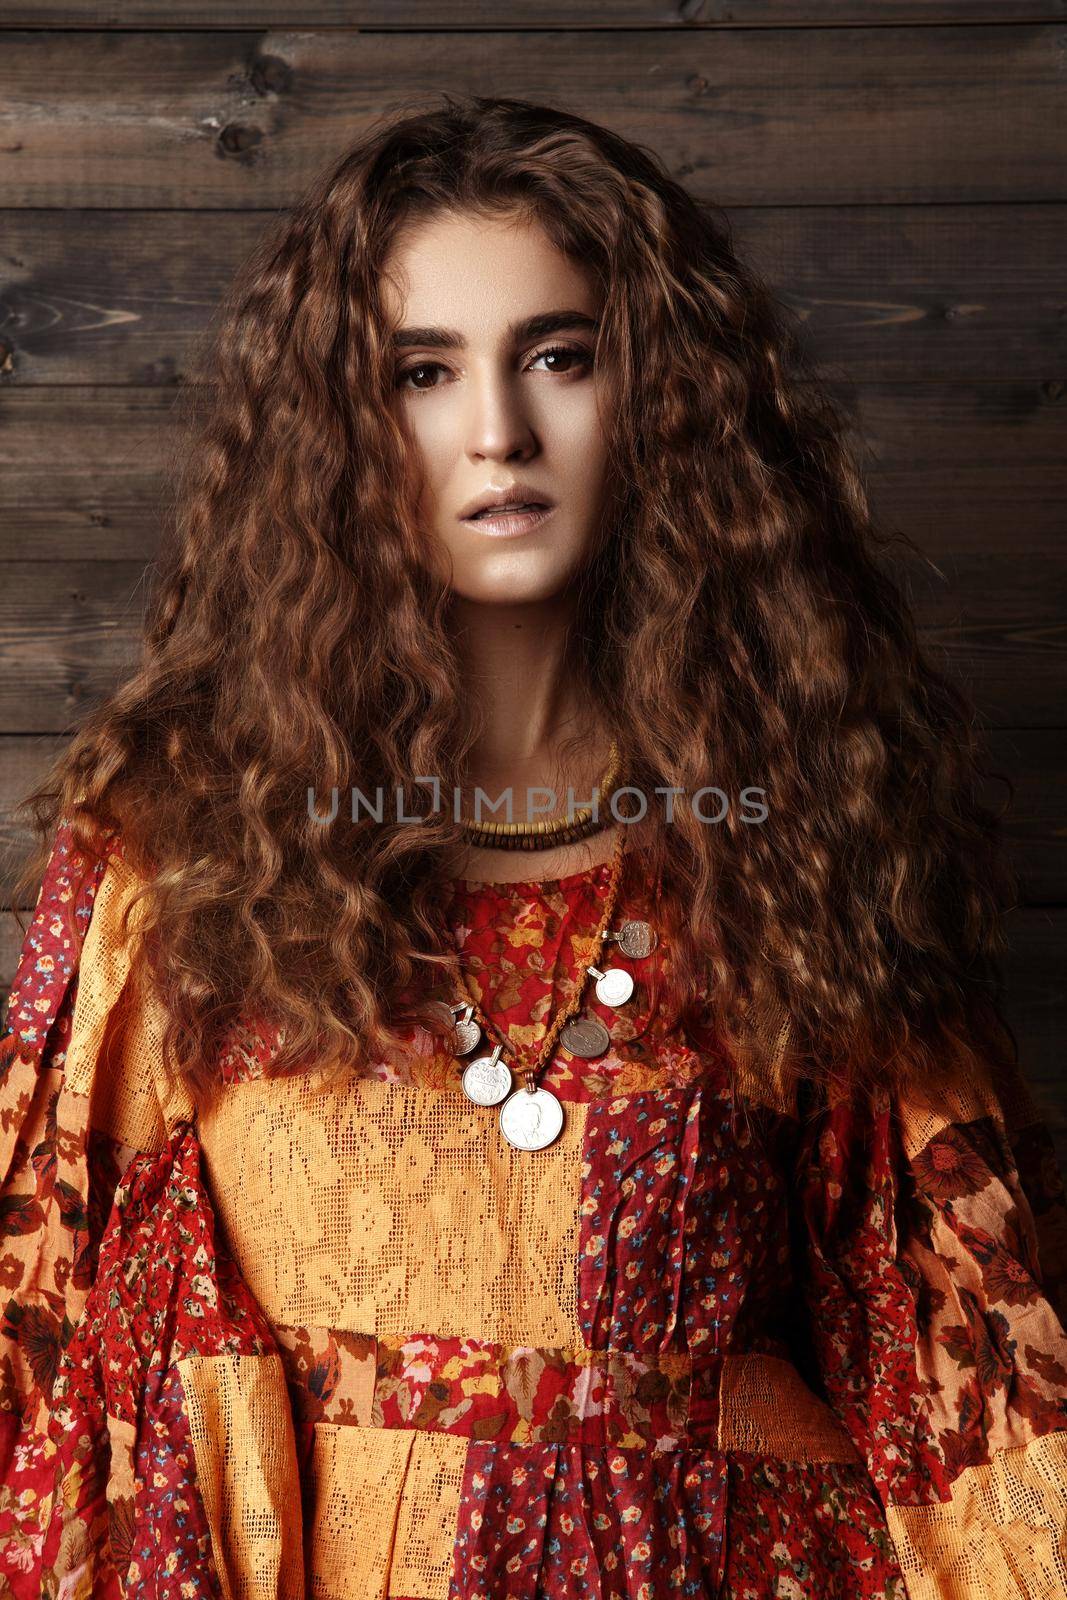 Beautiful young woman with long curly hairstyle, fashion jewelry with long brunette hair. Sexy girl in vogue style. Pretty arabian beauty portrait of female face. Indian style clothes, long dress